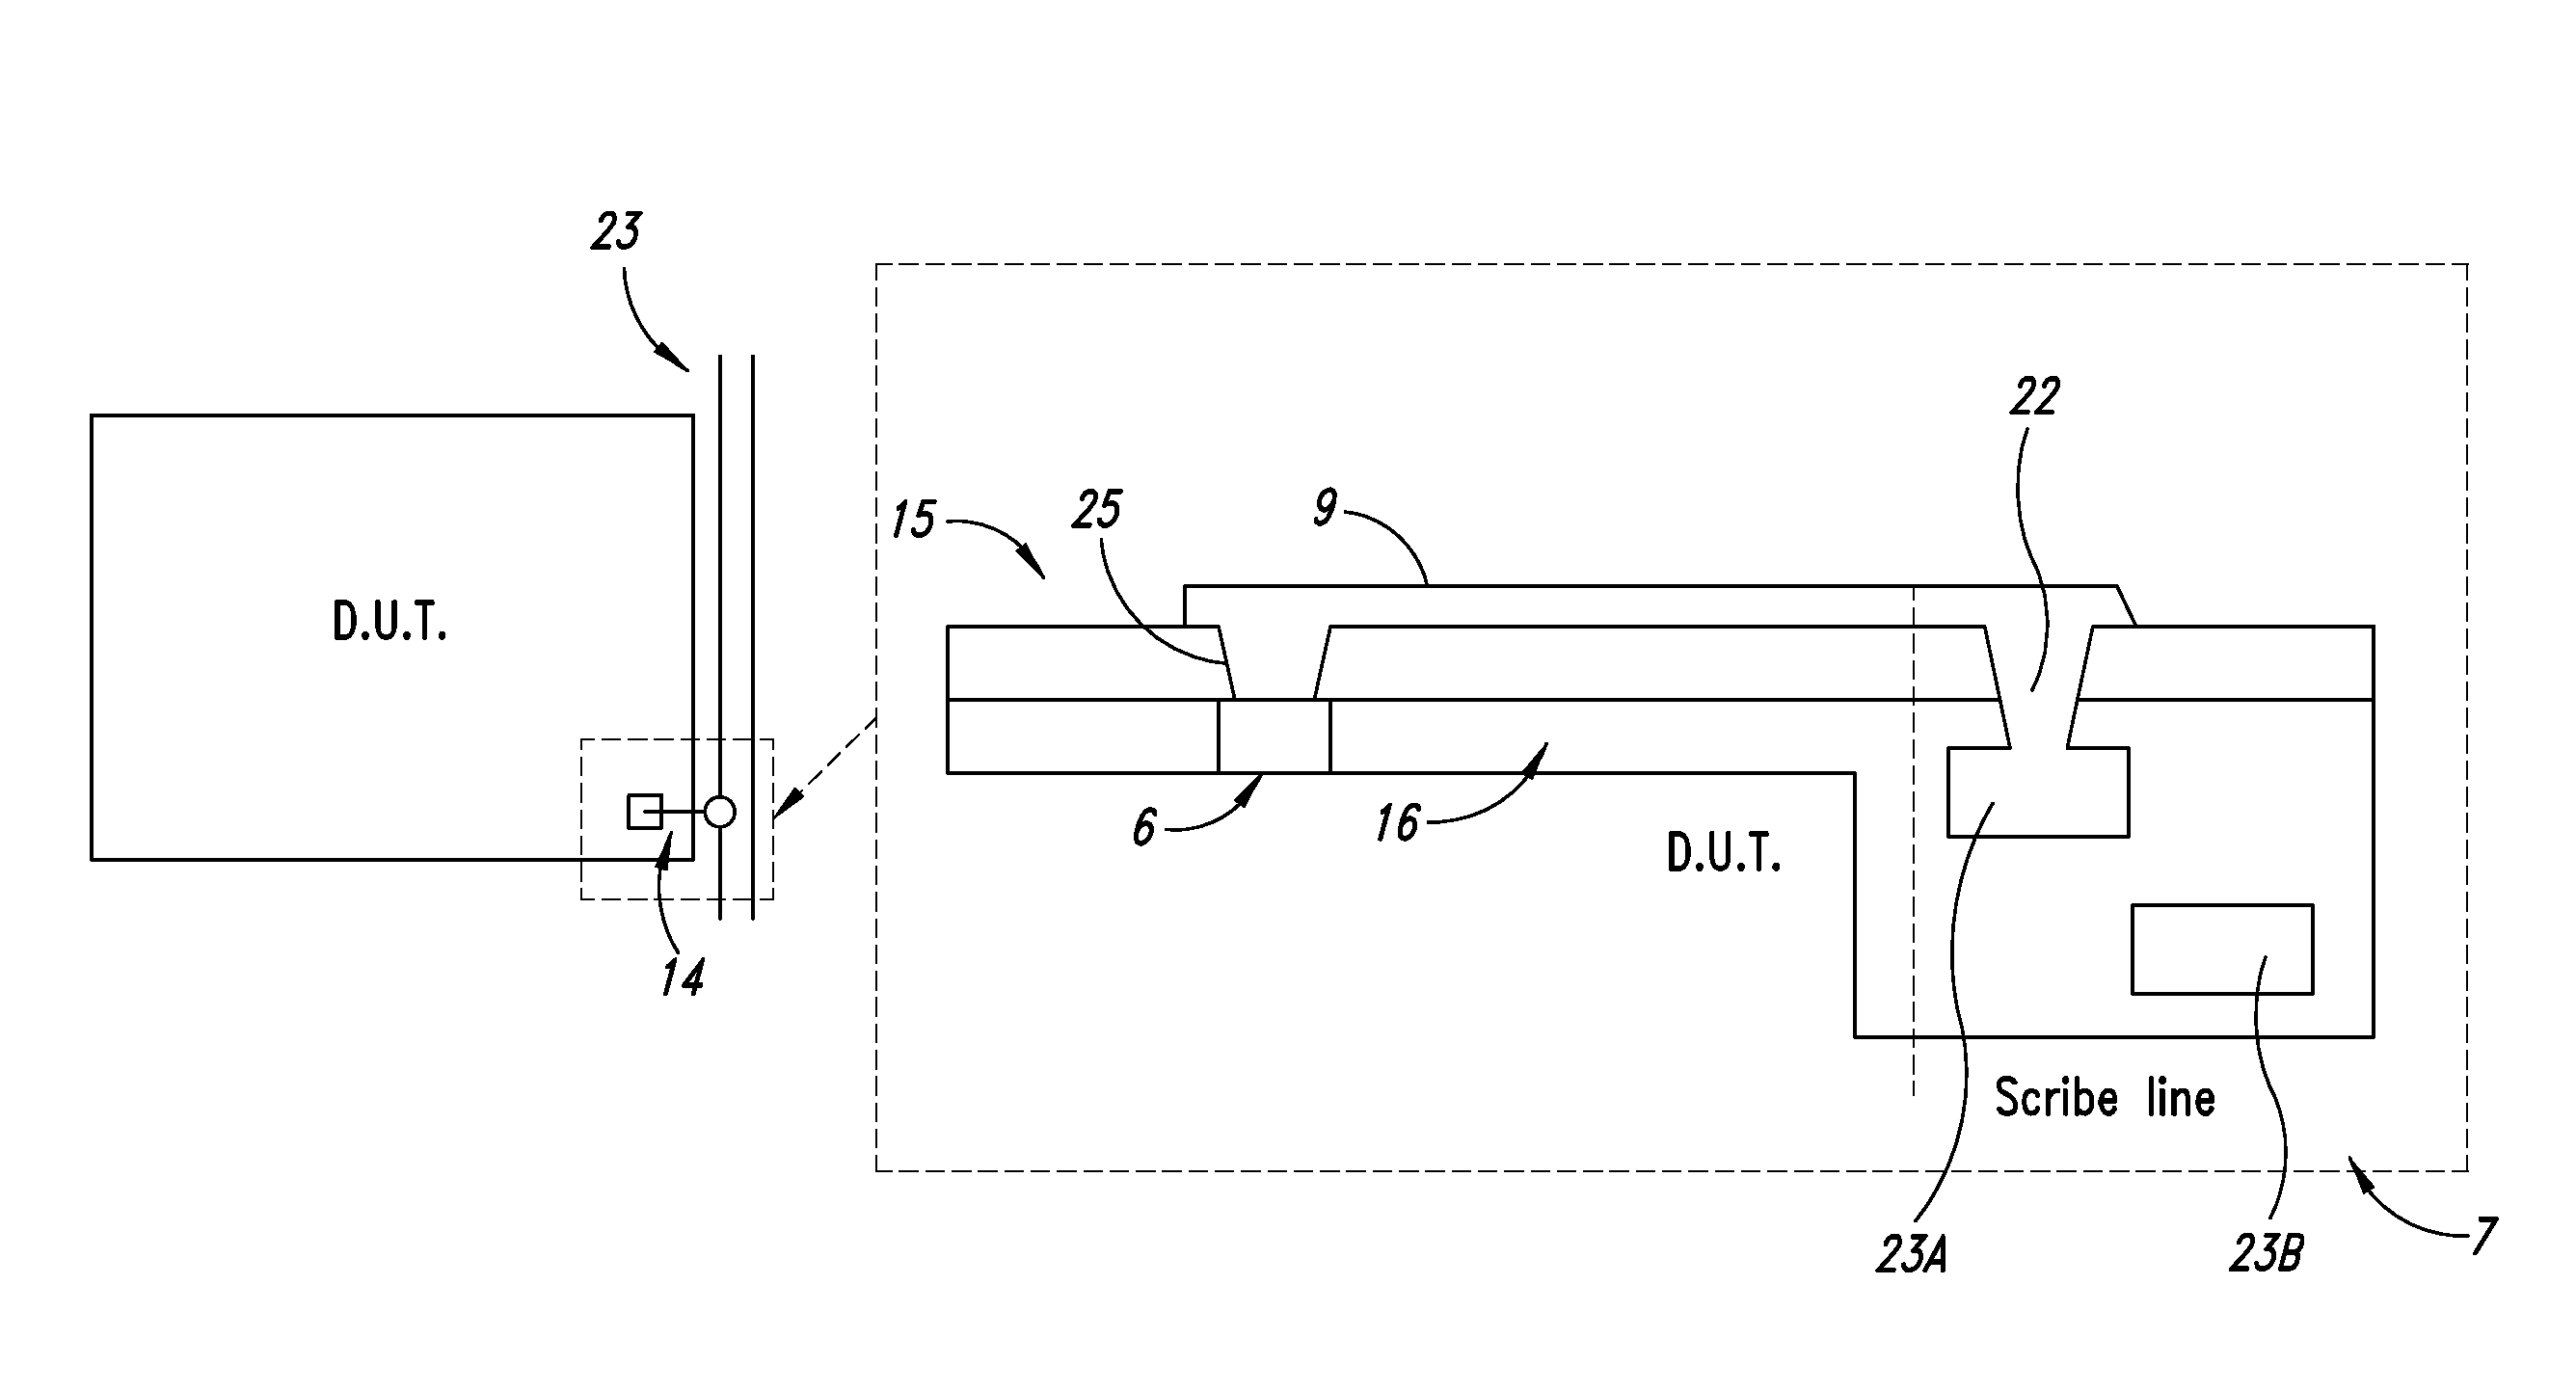 Circuit architecture for the parallel supplying during an electric or electromagnetic testing of a plurality of electronic devices integrated on a semiconductor wafer